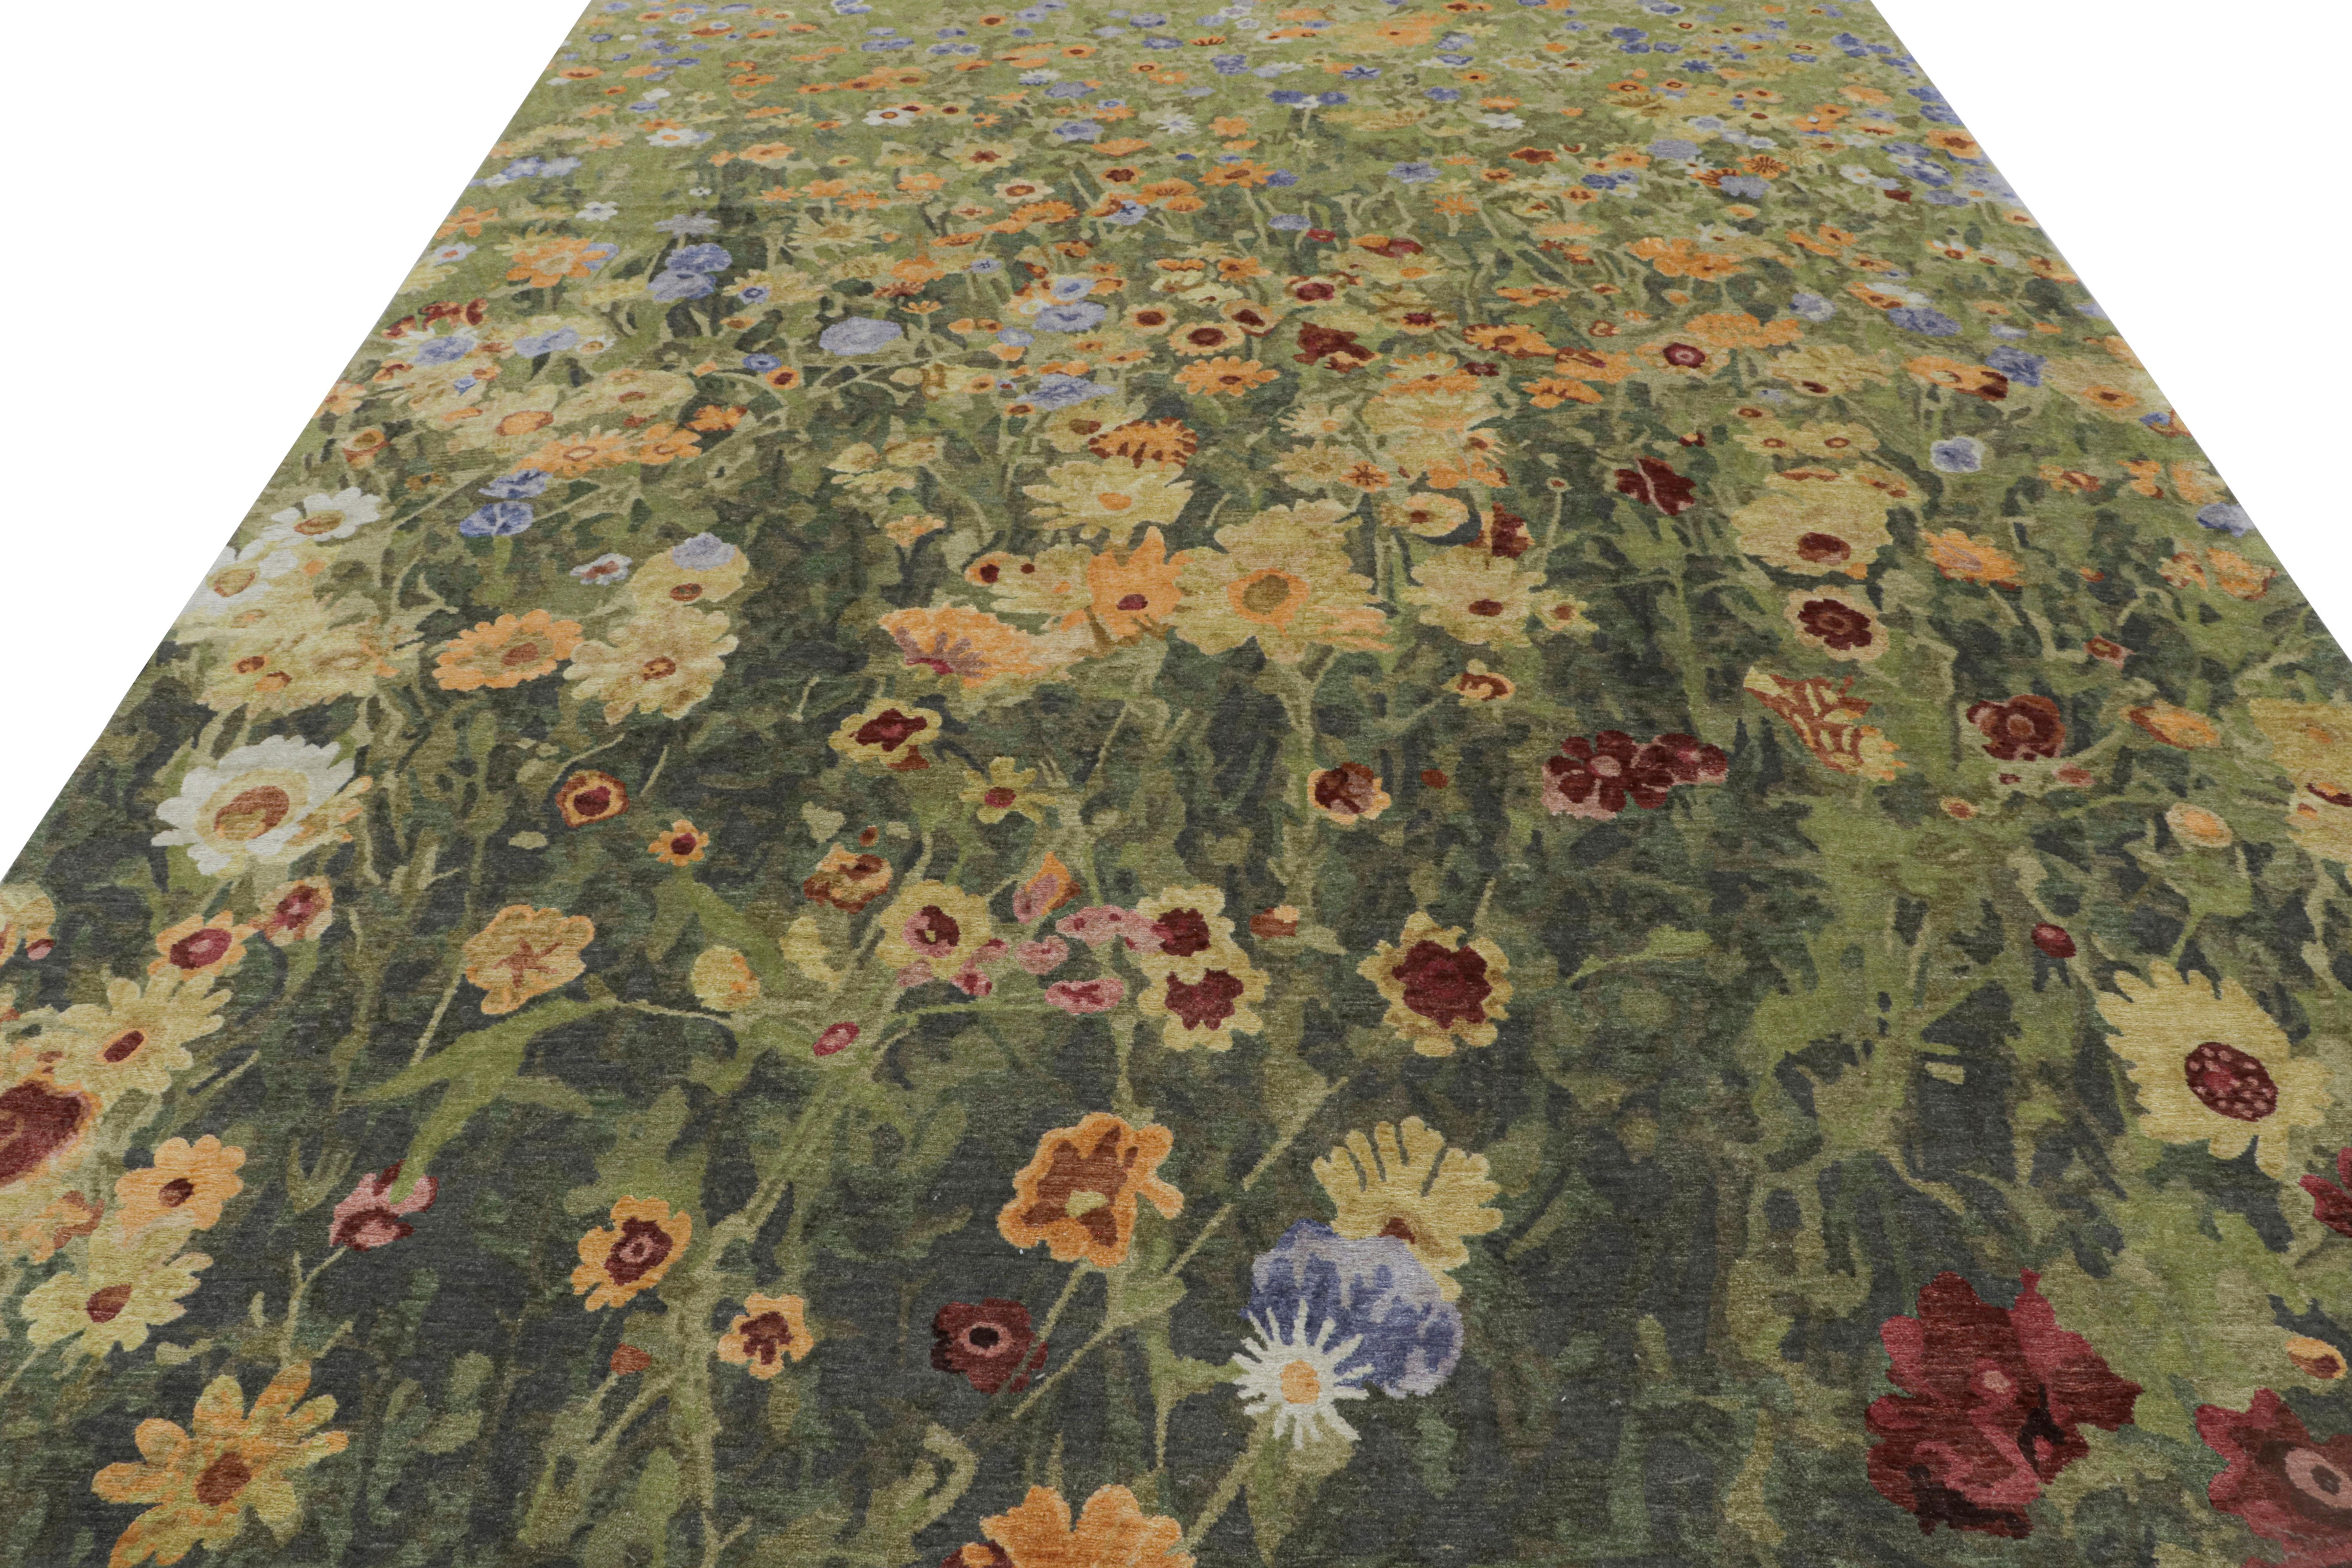 Hand-knotted in wool and silk, this 9x12 modern abstract rug features “Summer Dream” design draws inspiration from a lively botanical design executed like a Jackson Pollock-esque painting. 

On the Design:

“Summer Dream” is an homage to floral